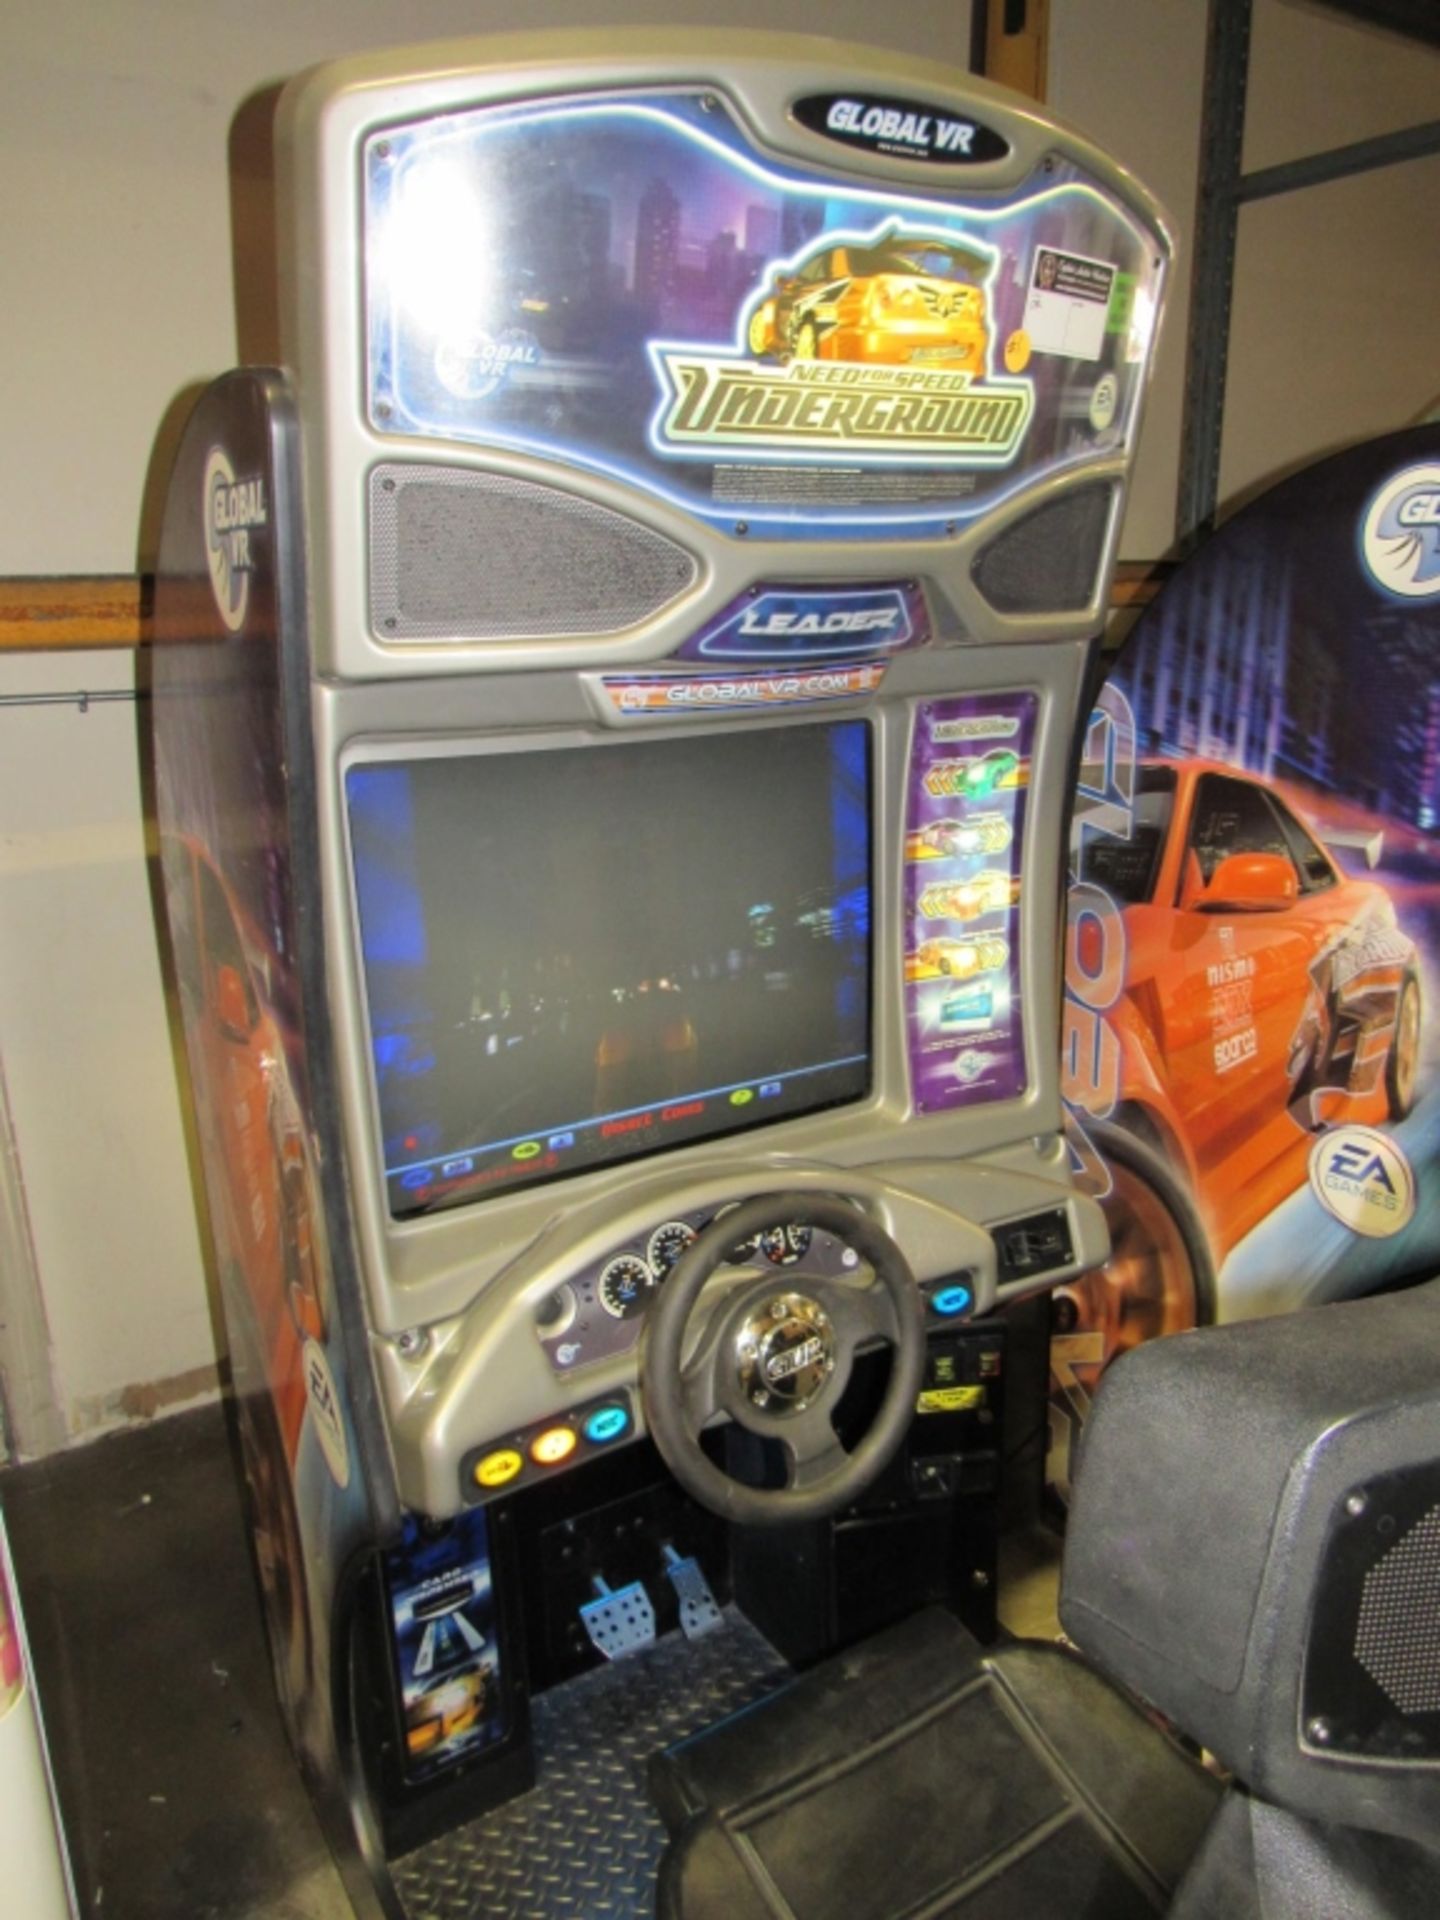 NEED FOR SPEED UNDERGROUND RACING ARCADE GAME #2 - Image 2 of 5